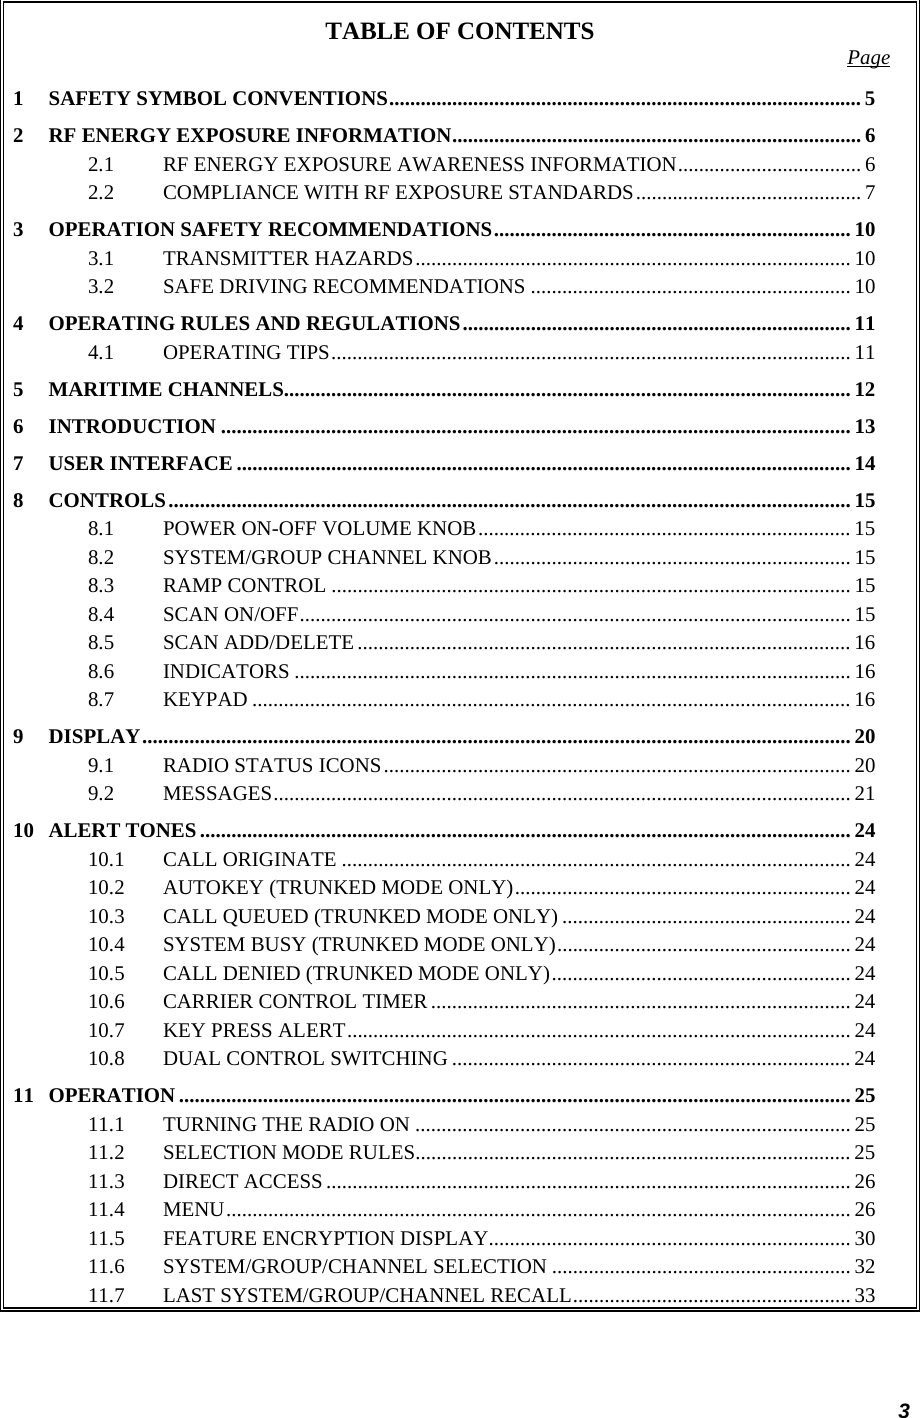 3 TABLE OF CONTENTS  Page 1 SAFETY SYMBOL CONVENTIONS.......................................................................................... 5 2 RF ENERGY EXPOSURE INFORMATION.............................................................................. 6 2.1 RF ENERGY EXPOSURE AWARENESS INFORMATION................................... 6 2.2 COMPLIANCE WITH RF EXPOSURE STANDARDS........................................... 7 3 OPERATION SAFETY RECOMMENDATIONS.................................................................... 10 3.1 TRANSMITTER HAZARDS................................................................................... 10 3.2 SAFE DRIVING RECOMMENDATIONS ............................................................. 10 4 OPERATING RULES AND REGULATIONS.......................................................................... 11 4.1 OPERATING TIPS................................................................................................... 11 5 MARITIME CHANNELS............................................................................................................ 12 6 INTRODUCTION ........................................................................................................................ 13 7 USER INTERFACE ..................................................................................................................... 14 8 CONTROLS.................................................................................................................................. 15 8.1 POWER ON-OFF VOLUME KNOB....................................................................... 15 8.2 SYSTEM/GROUP CHANNEL KNOB.................................................................... 15 8.3 RAMP CONTROL ................................................................................................... 15 8.4 SCAN ON/OFF......................................................................................................... 15 8.5 SCAN ADD/DELETE .............................................................................................. 16 8.6 INDICATORS .......................................................................................................... 16 8.7 KEYPAD .................................................................................................................. 16 9 DISPLAY....................................................................................................................................... 20 9.1 RADIO STATUS ICONS......................................................................................... 20 9.2 MESSAGES.............................................................................................................. 21 10 ALERT TONES............................................................................................................................ 24 10.1 CALL ORIGINATE ................................................................................................. 24 10.2 AUTOKEY (TRUNKED MODE ONLY)................................................................ 24 10.3 CALL QUEUED (TRUNKED MODE ONLY) ....................................................... 24 10.4 SYSTEM BUSY (TRUNKED MODE ONLY)........................................................ 24 10.5 CALL DENIED (TRUNKED MODE ONLY)......................................................... 24 10.6 CARRIER CONTROL TIMER ................................................................................ 24 10.7 KEY PRESS ALERT................................................................................................ 24 10.8 DUAL CONTROL SWITCHING ............................................................................ 24 11 OPERATION ................................................................................................................................ 25 11.1 TURNING THE RADIO ON ................................................................................... 25 11.2 SELECTION MODE RULES................................................................................... 25 11.3 DIRECT ACCESS .................................................................................................... 26 11.4 MENU....................................................................................................................... 26 11.5 FEATURE ENCRYPTION DISPLAY..................................................................... 30 11.6 SYSTEM/GROUP/CHANNEL SELECTION ......................................................... 32 11.7 LAST SYSTEM/GROUP/CHANNEL RECALL..................................................... 33 